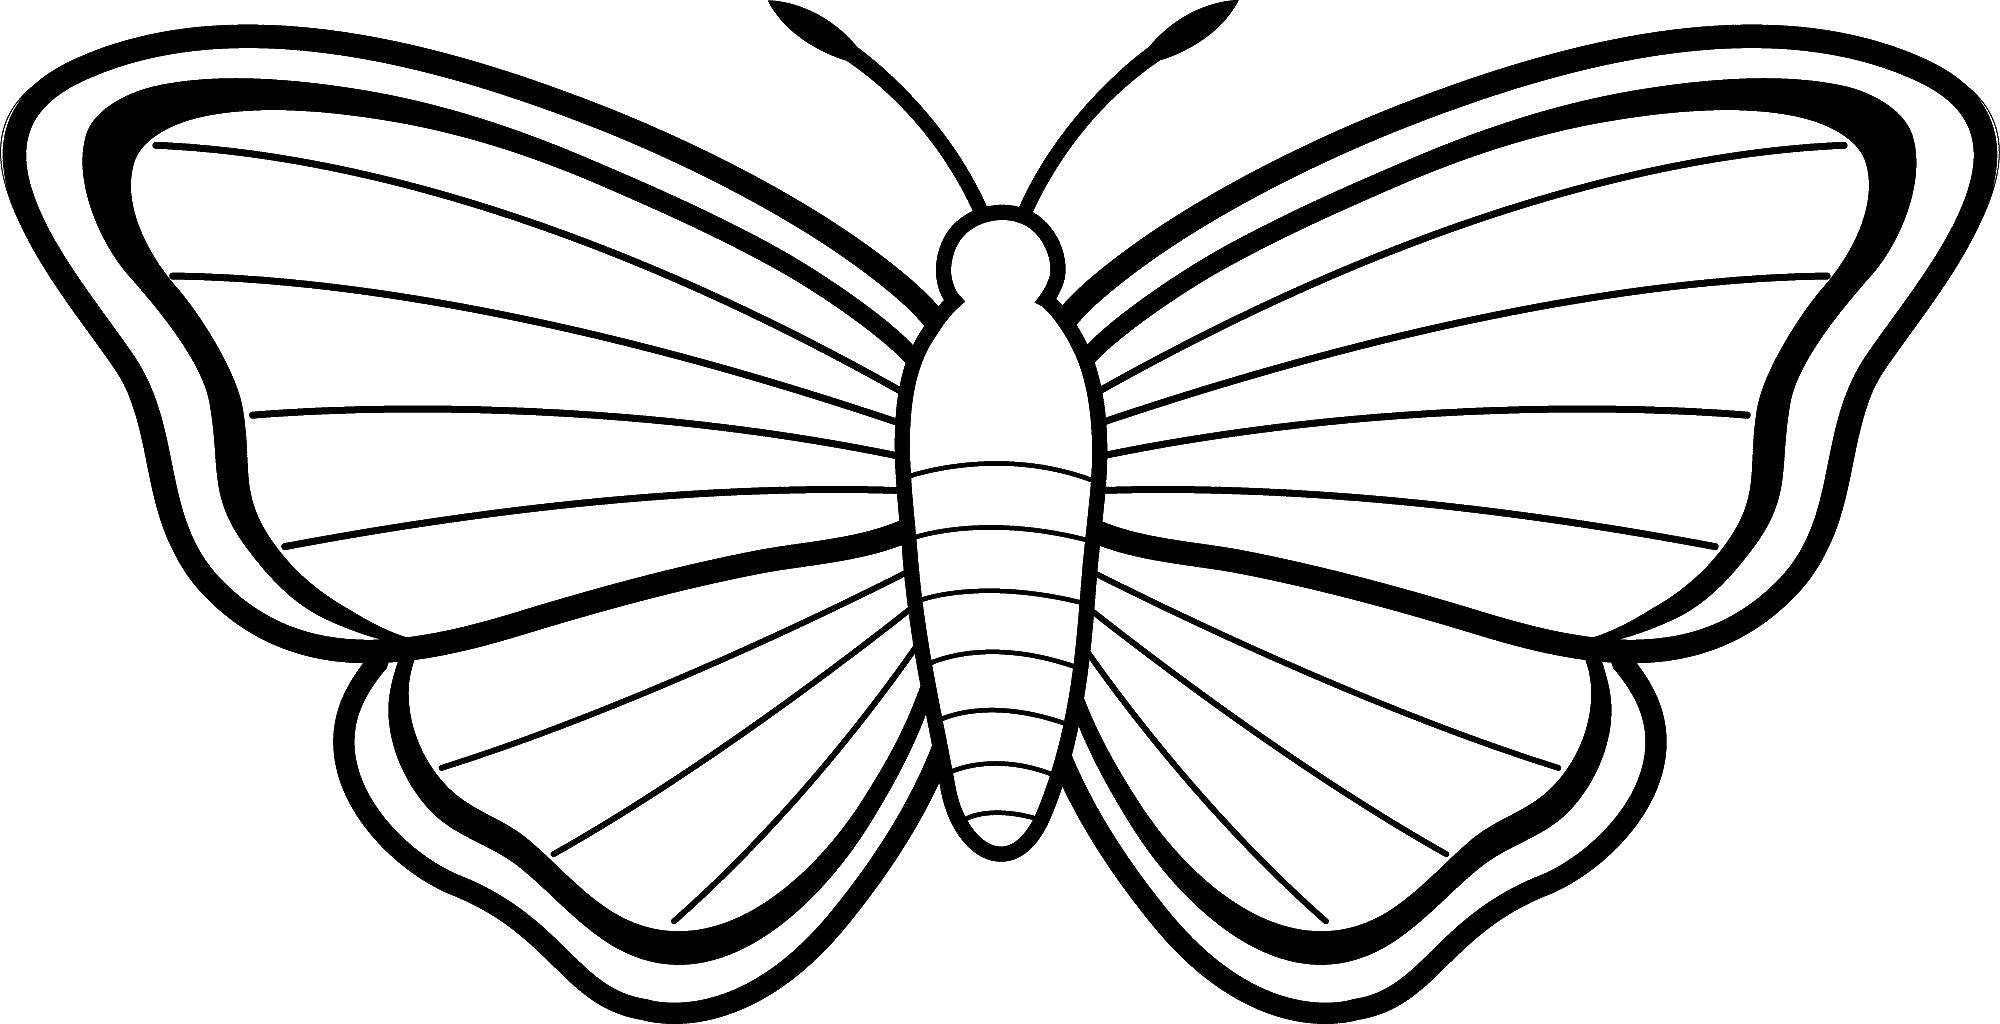 Coloring Butterfly. Category Butterfly. Tags:  insects, butterfly, butterflies, caterpillar.